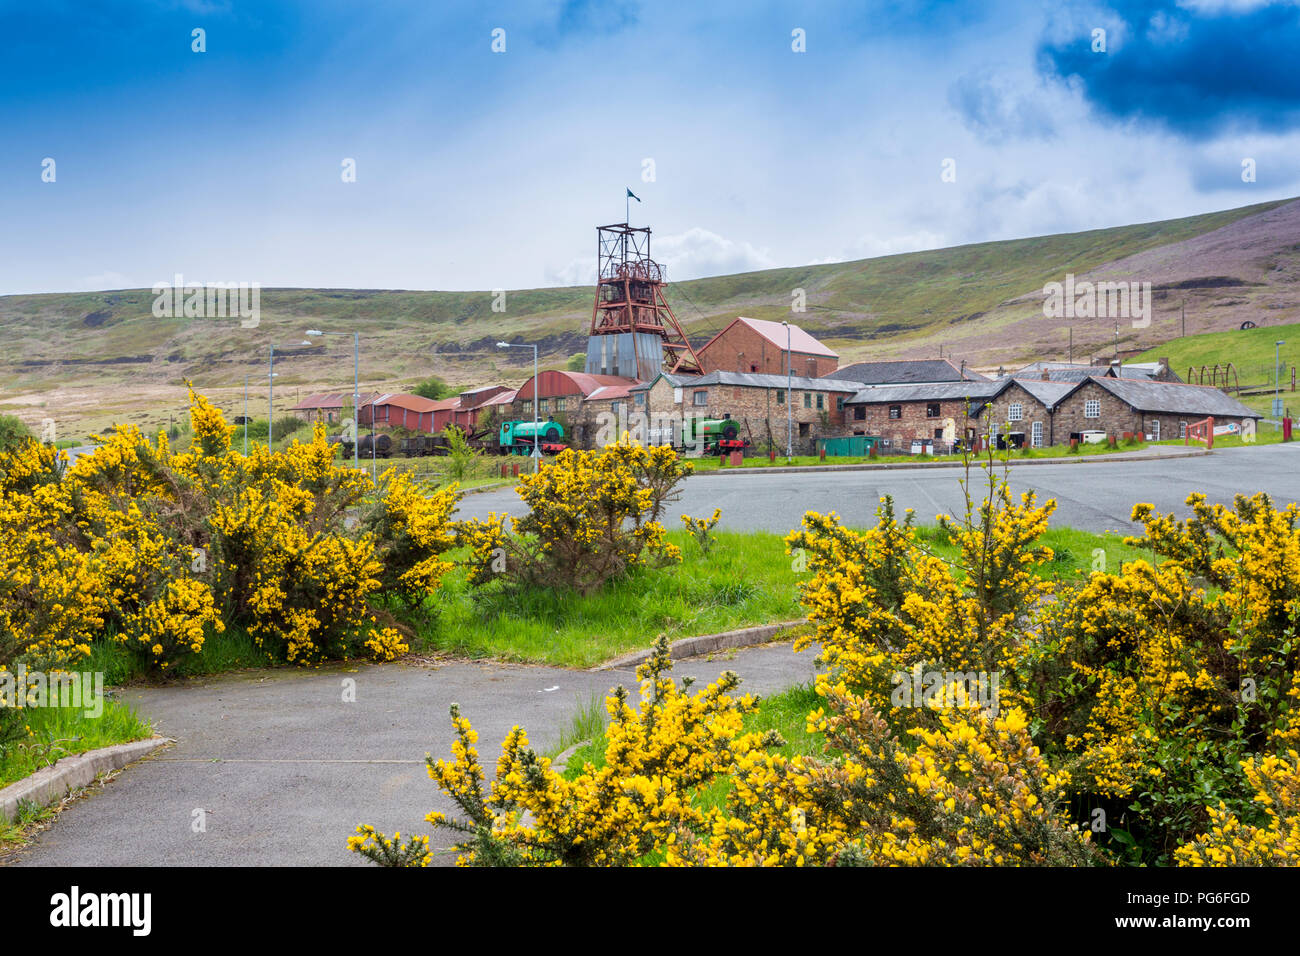 Vibrant gorse bushes in front of Big Pit - a former coal mine now a UNESCO World Heritage Site in Blaenavon, Gwent, Wales, UK Stock Photo